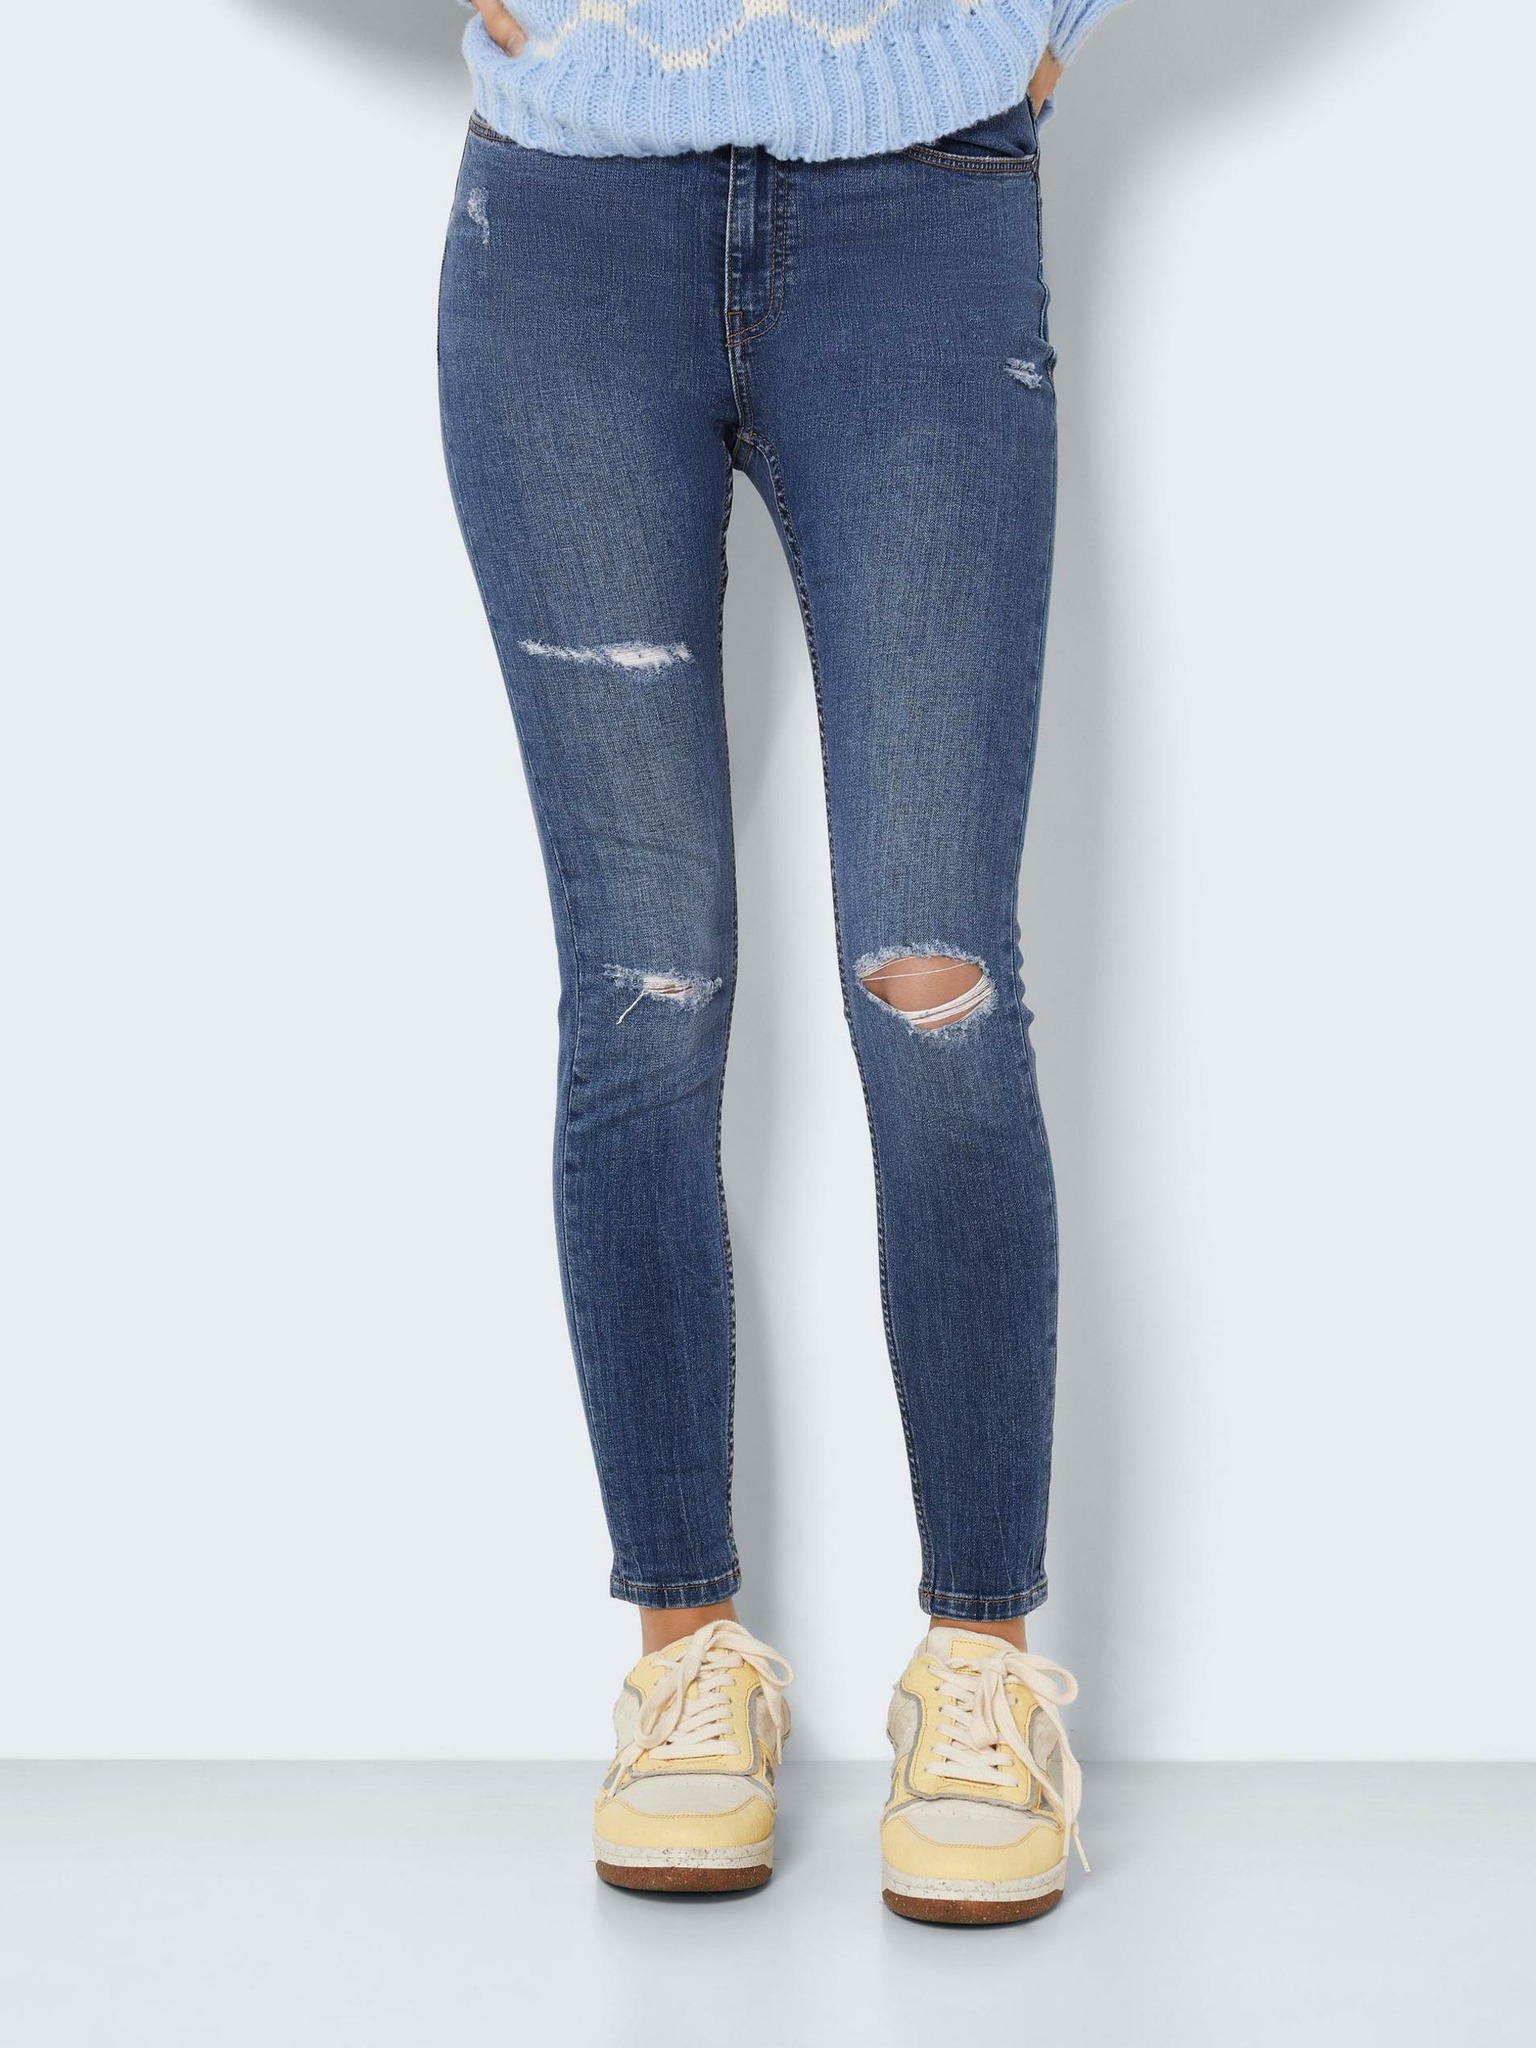 Noisy May Jeans, Skinny, Ripped, & Ankle Jeans